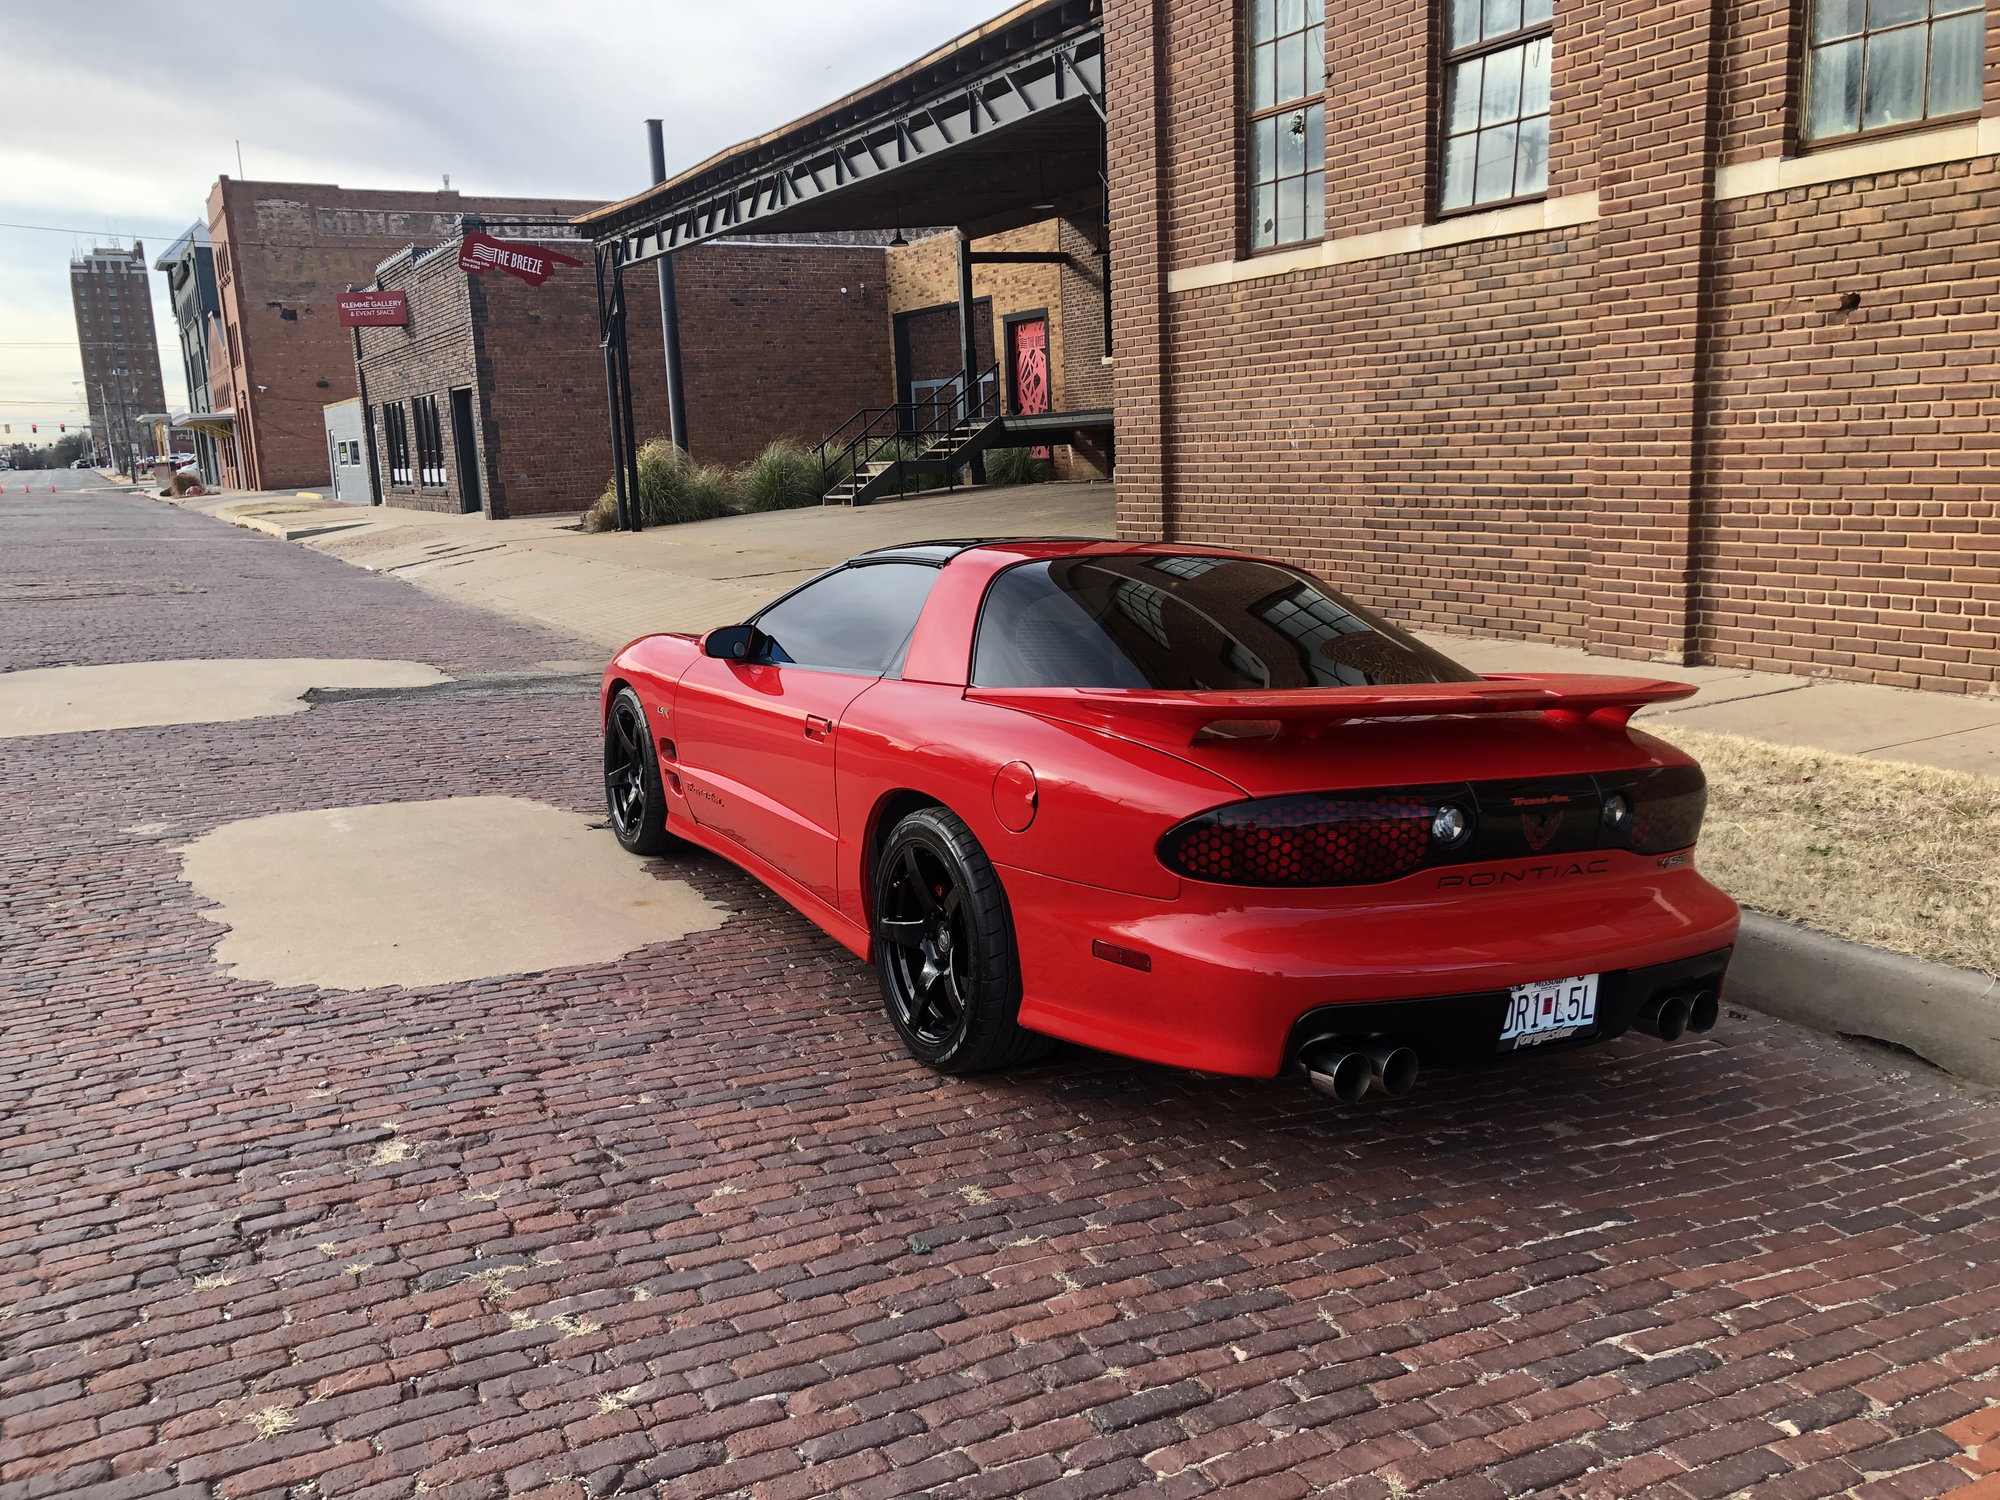 1998 Pontiac Firebird - 1998 Trans Am WS6, 465hp 37k miles CLEAN!!!! - Used - VIN 1234566788 - 37,000 Miles - 8 cyl - 2WD - Manual - Red - Enid, OK 73703, United States